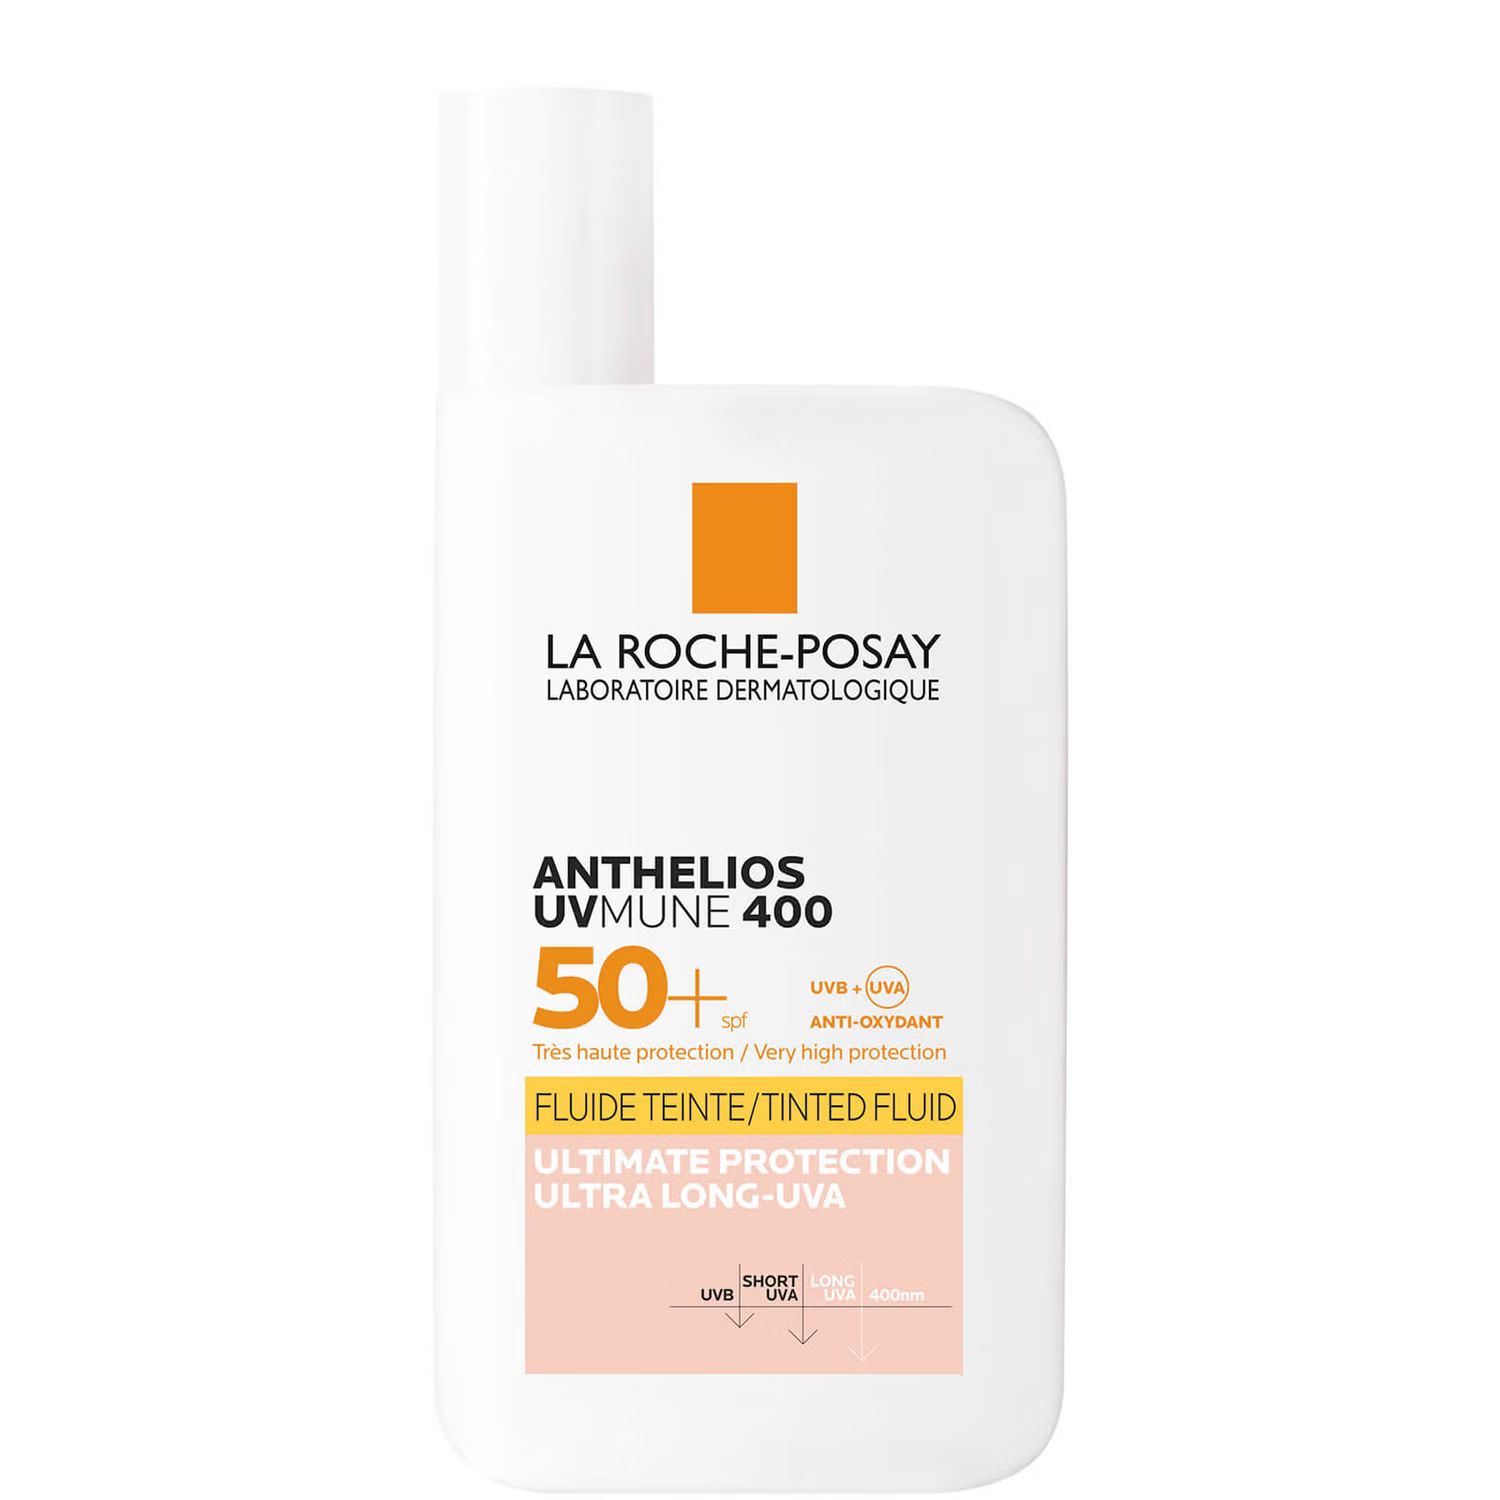 La Roche-Posay Anthelios UVMune 400 Invisible Fluid Tinted SPF50+ 50ml | Cult Beauty